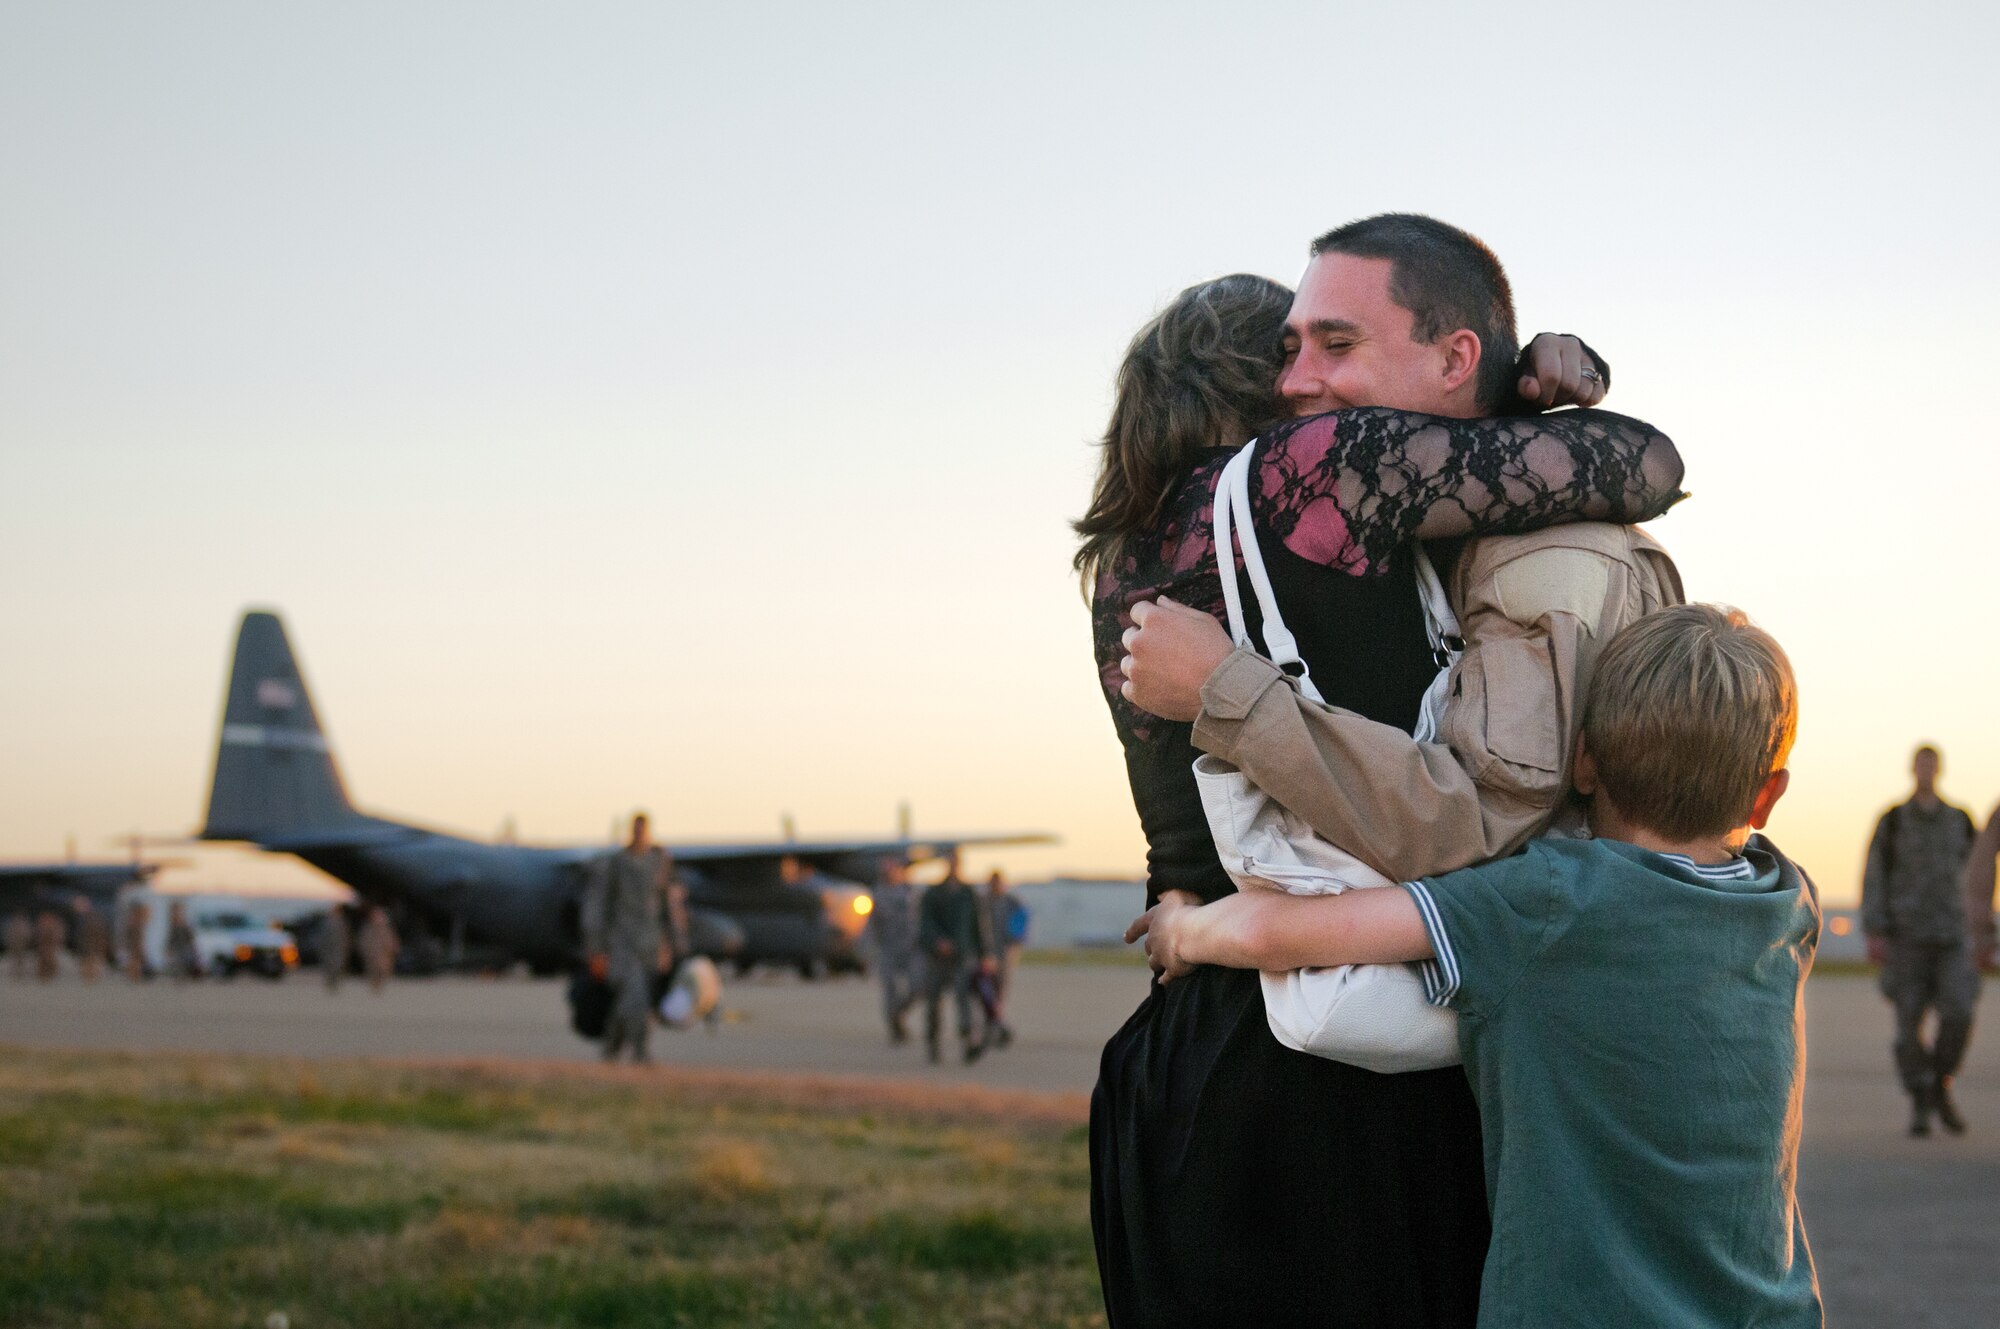 A member of the 123rd Airlift Wing gets a welcome-home hug from loved ones Nov. 10, 2012, at the Kentucky Air National Guard Base in Louisville, Ky. The Airman was one of 58 Kentucky Guardsmen returning from a four-month deployment to the Persian Gulf. (U.S. Air Force photo by Master Sgt. Phil Speck)